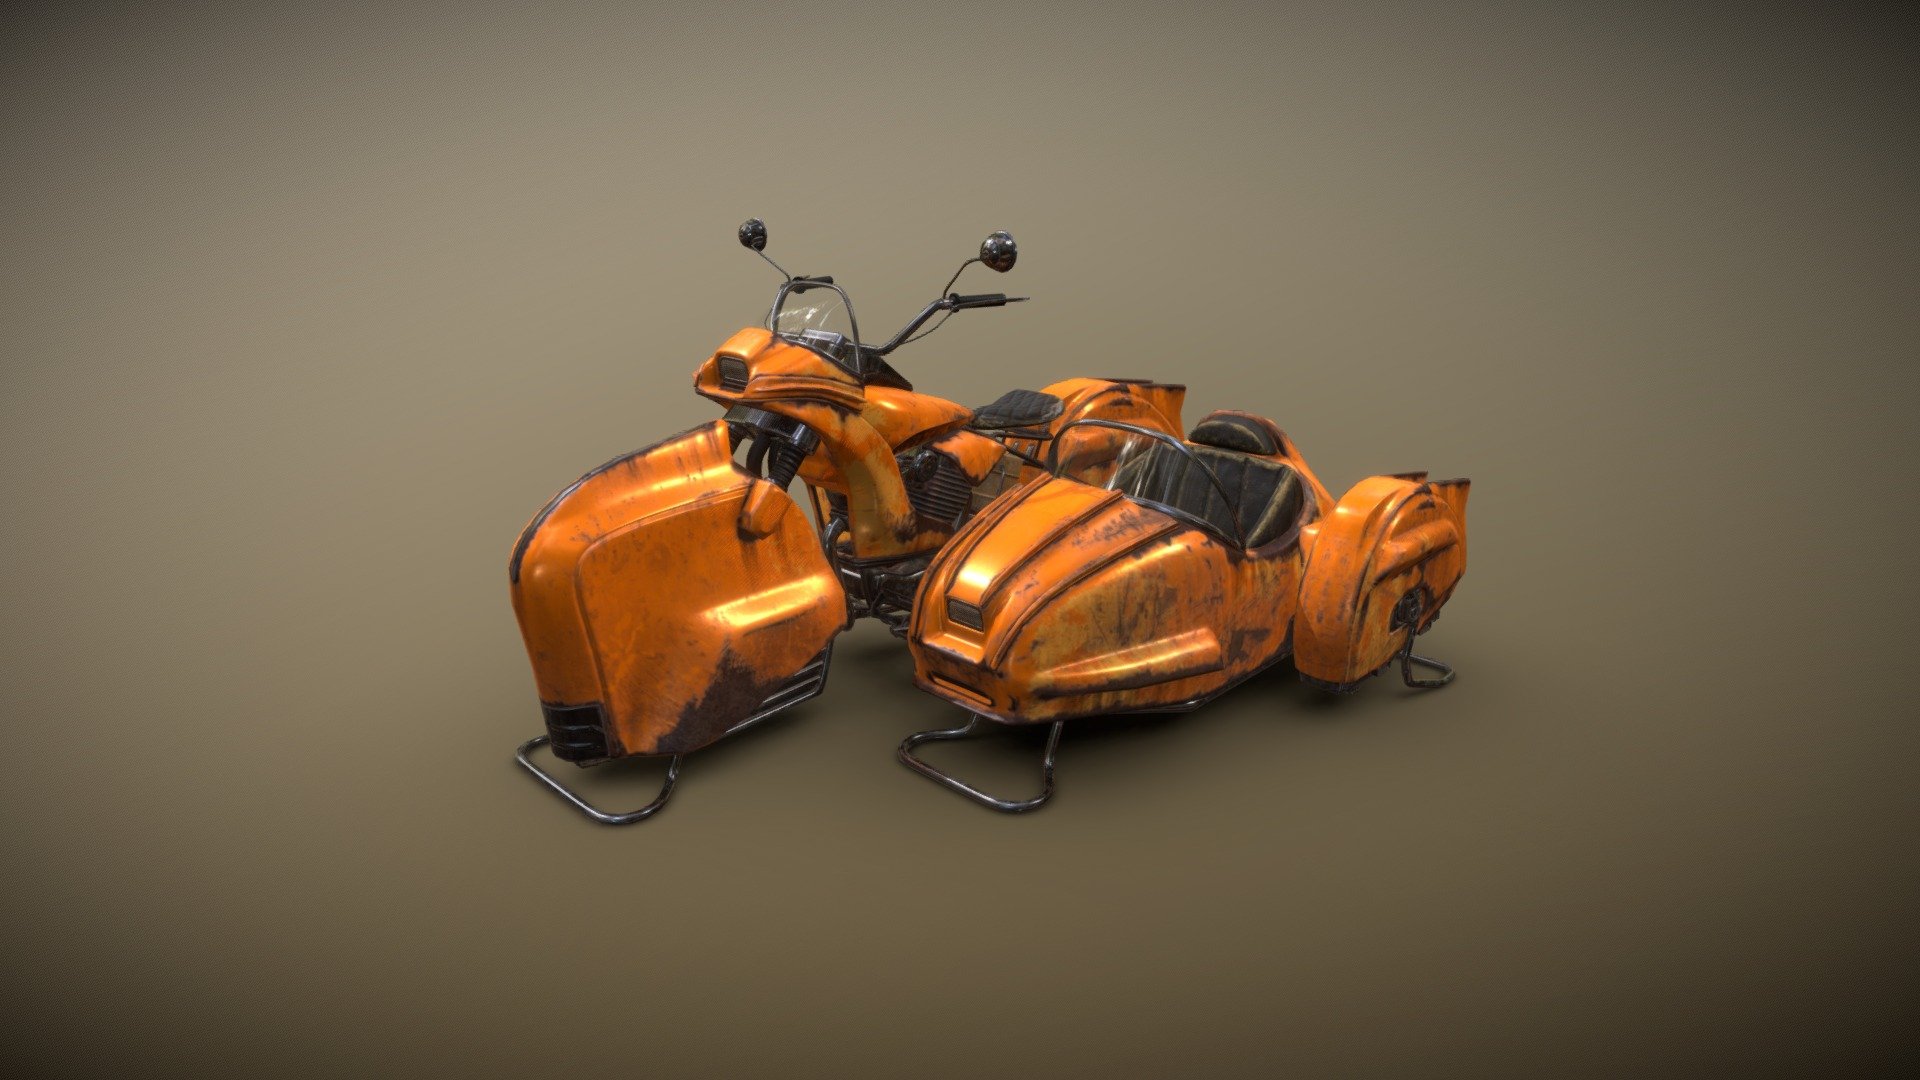 Introducing the Victory - a fusion of Atom-Punk inspiration and iconic design! With a perfect blend of design characteristics from classic motorcycles with a twist of futurism, this masterpiece exudes class and style.

Crafted using a high-low poly construction method, this model showcases meticulous attention to detail. Enhancing the realism further, it comes with a PBR Metallic / Roughness texture set, where light and shadow interact with precision.

Originally designed for modding purposes, the Vicotry serves as a versatile canvas for creative minds to explore and customize. Fully modeled with a removable sidecar adds an authentic touch to your virtual experience.

Discover more of my artwork on ArtStation : https://www.artstation.com/edgeuk90

For a personalized touch, custom color combinations can be accommodated upon request 3d model